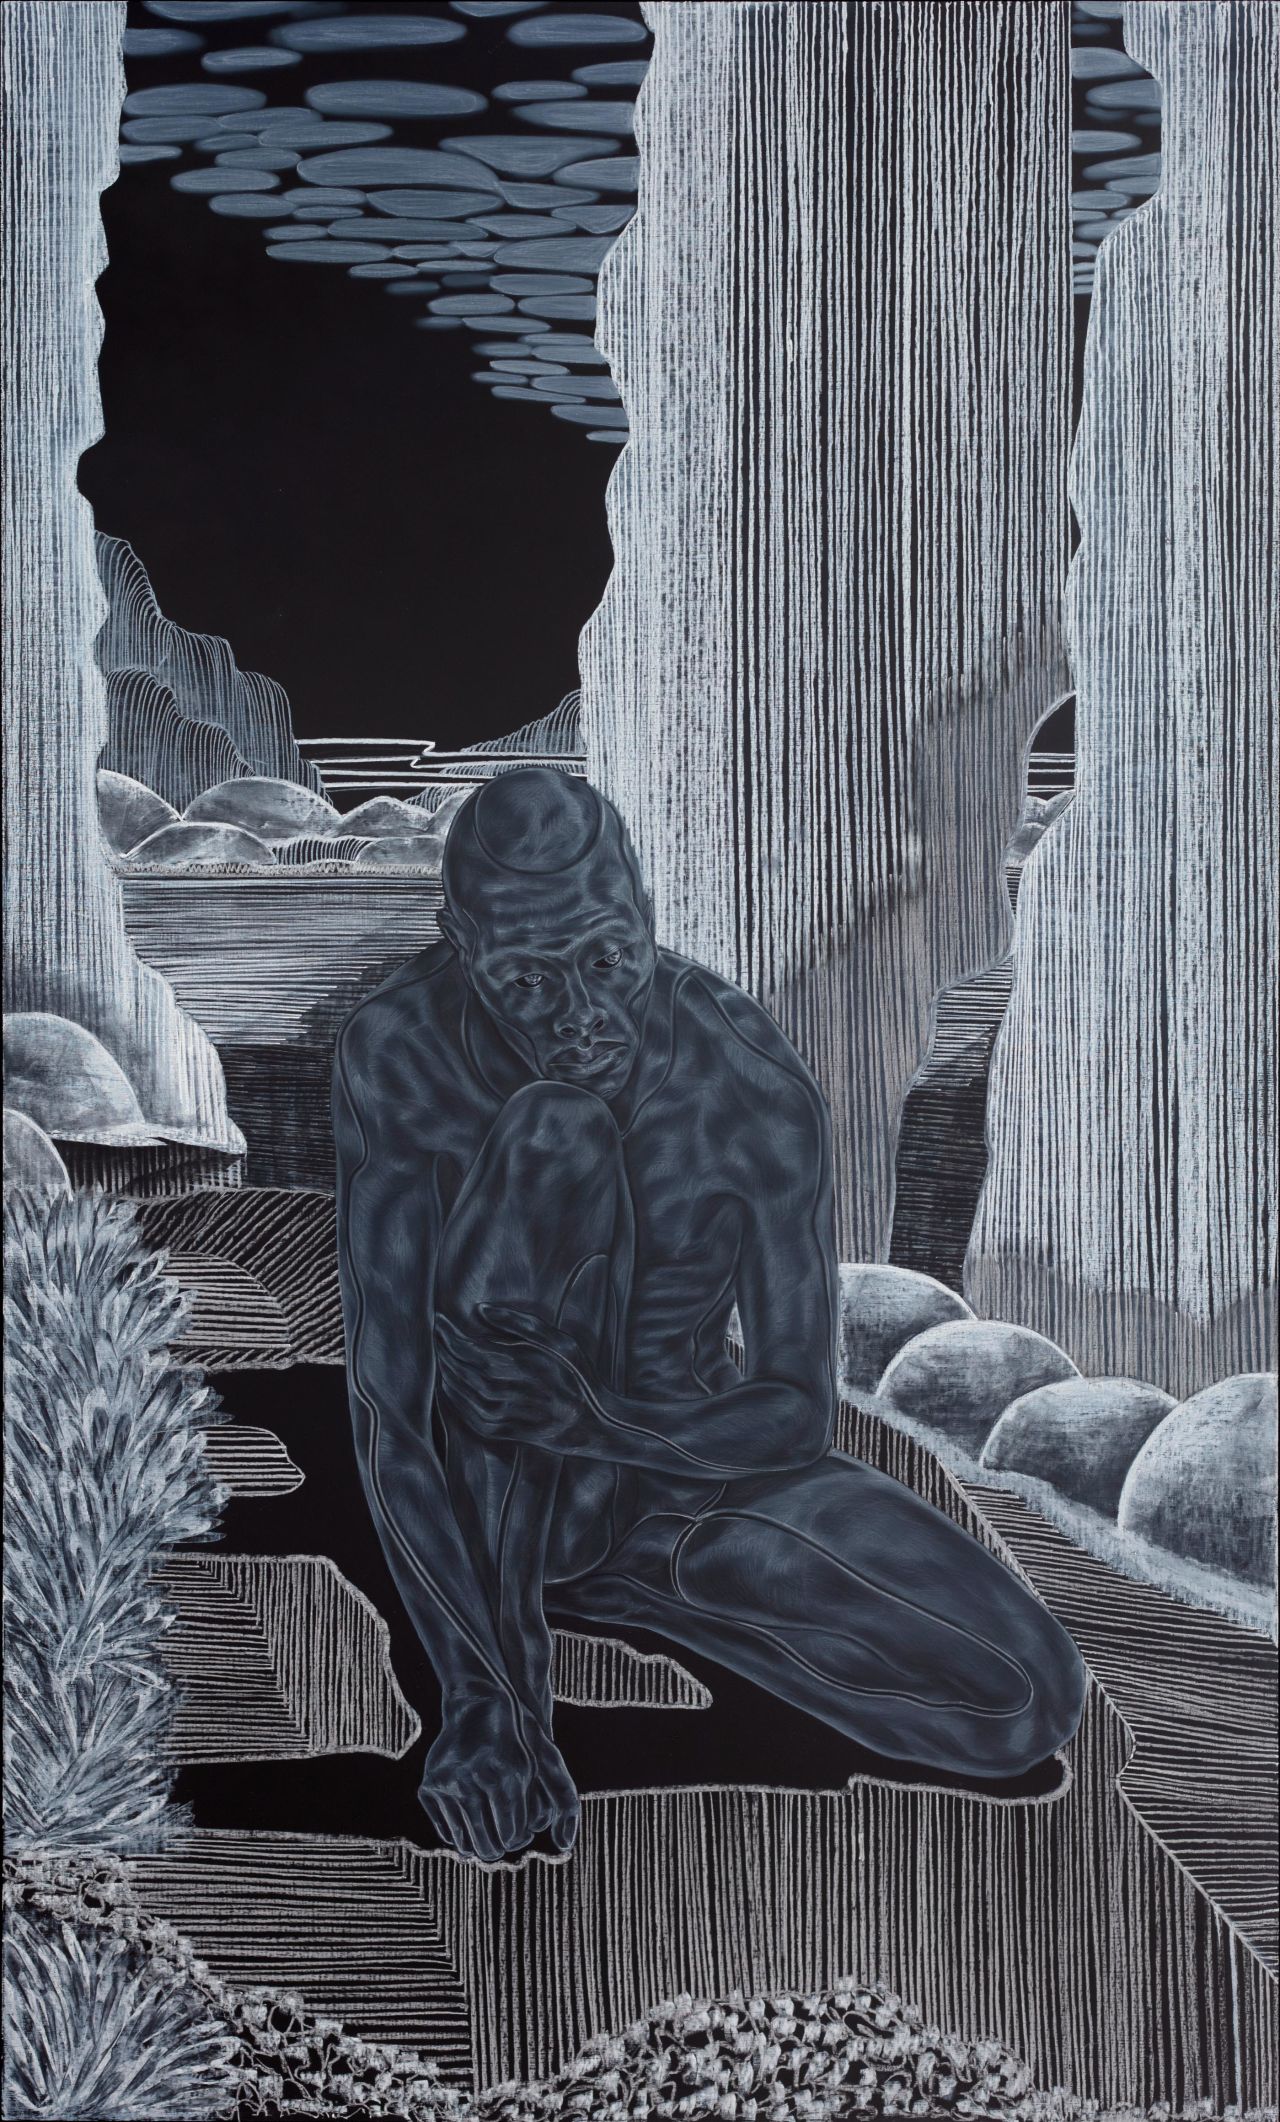 The Barbican show gave Ojih Odutola the opportunity to work on an ambitious scale, mixing large-scale and intimate monochrome works based on an imagined ancient myth.